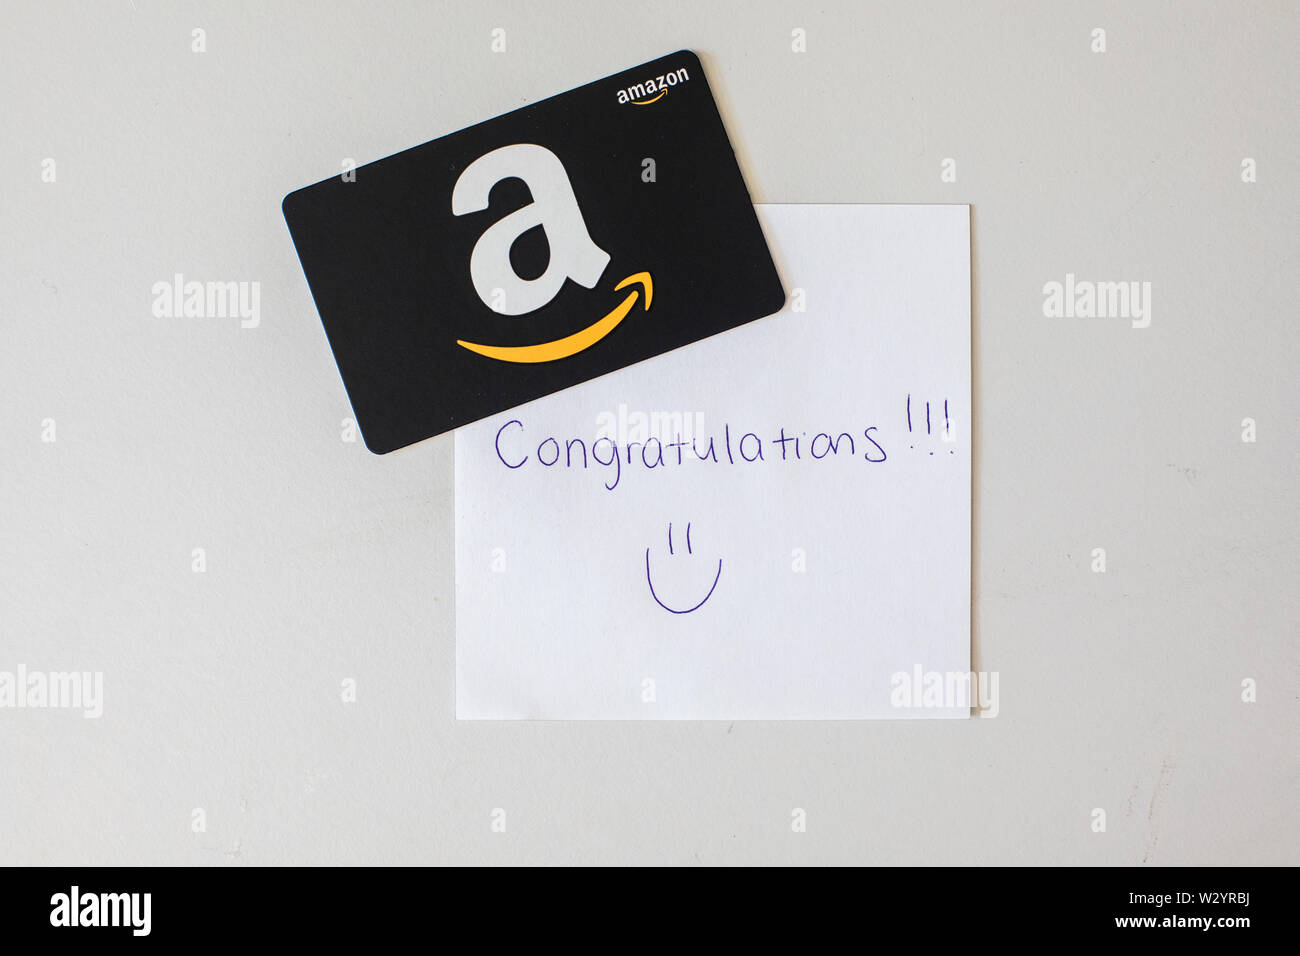 Washington D C Usa July 10 19 A 50 Amazon Gift Card Allows The Recipient To Purchase Items From The Amazon Com Website Stock Photo Alamy